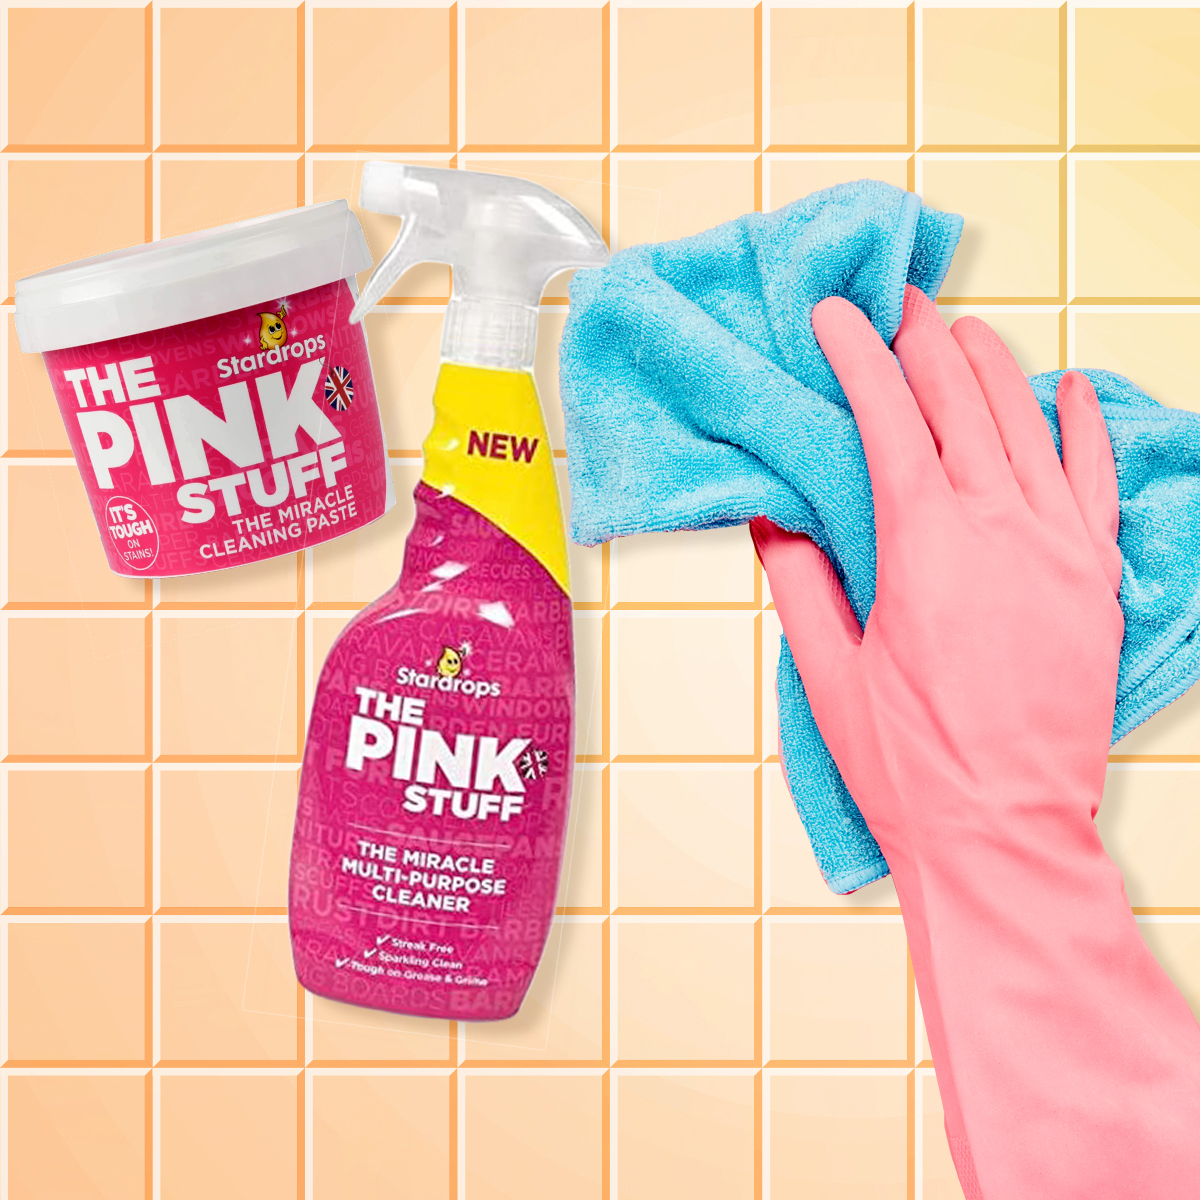 https://akns-images.eonline.com/eol_images/Entire_Site/202144/rs_1200x1200-210504090528-1200-Ecomm-Pink-Stuff-Cleaning-Products.jpg?fit=around%7C1200:1200&output-quality=90&crop=1200:1200;center,top